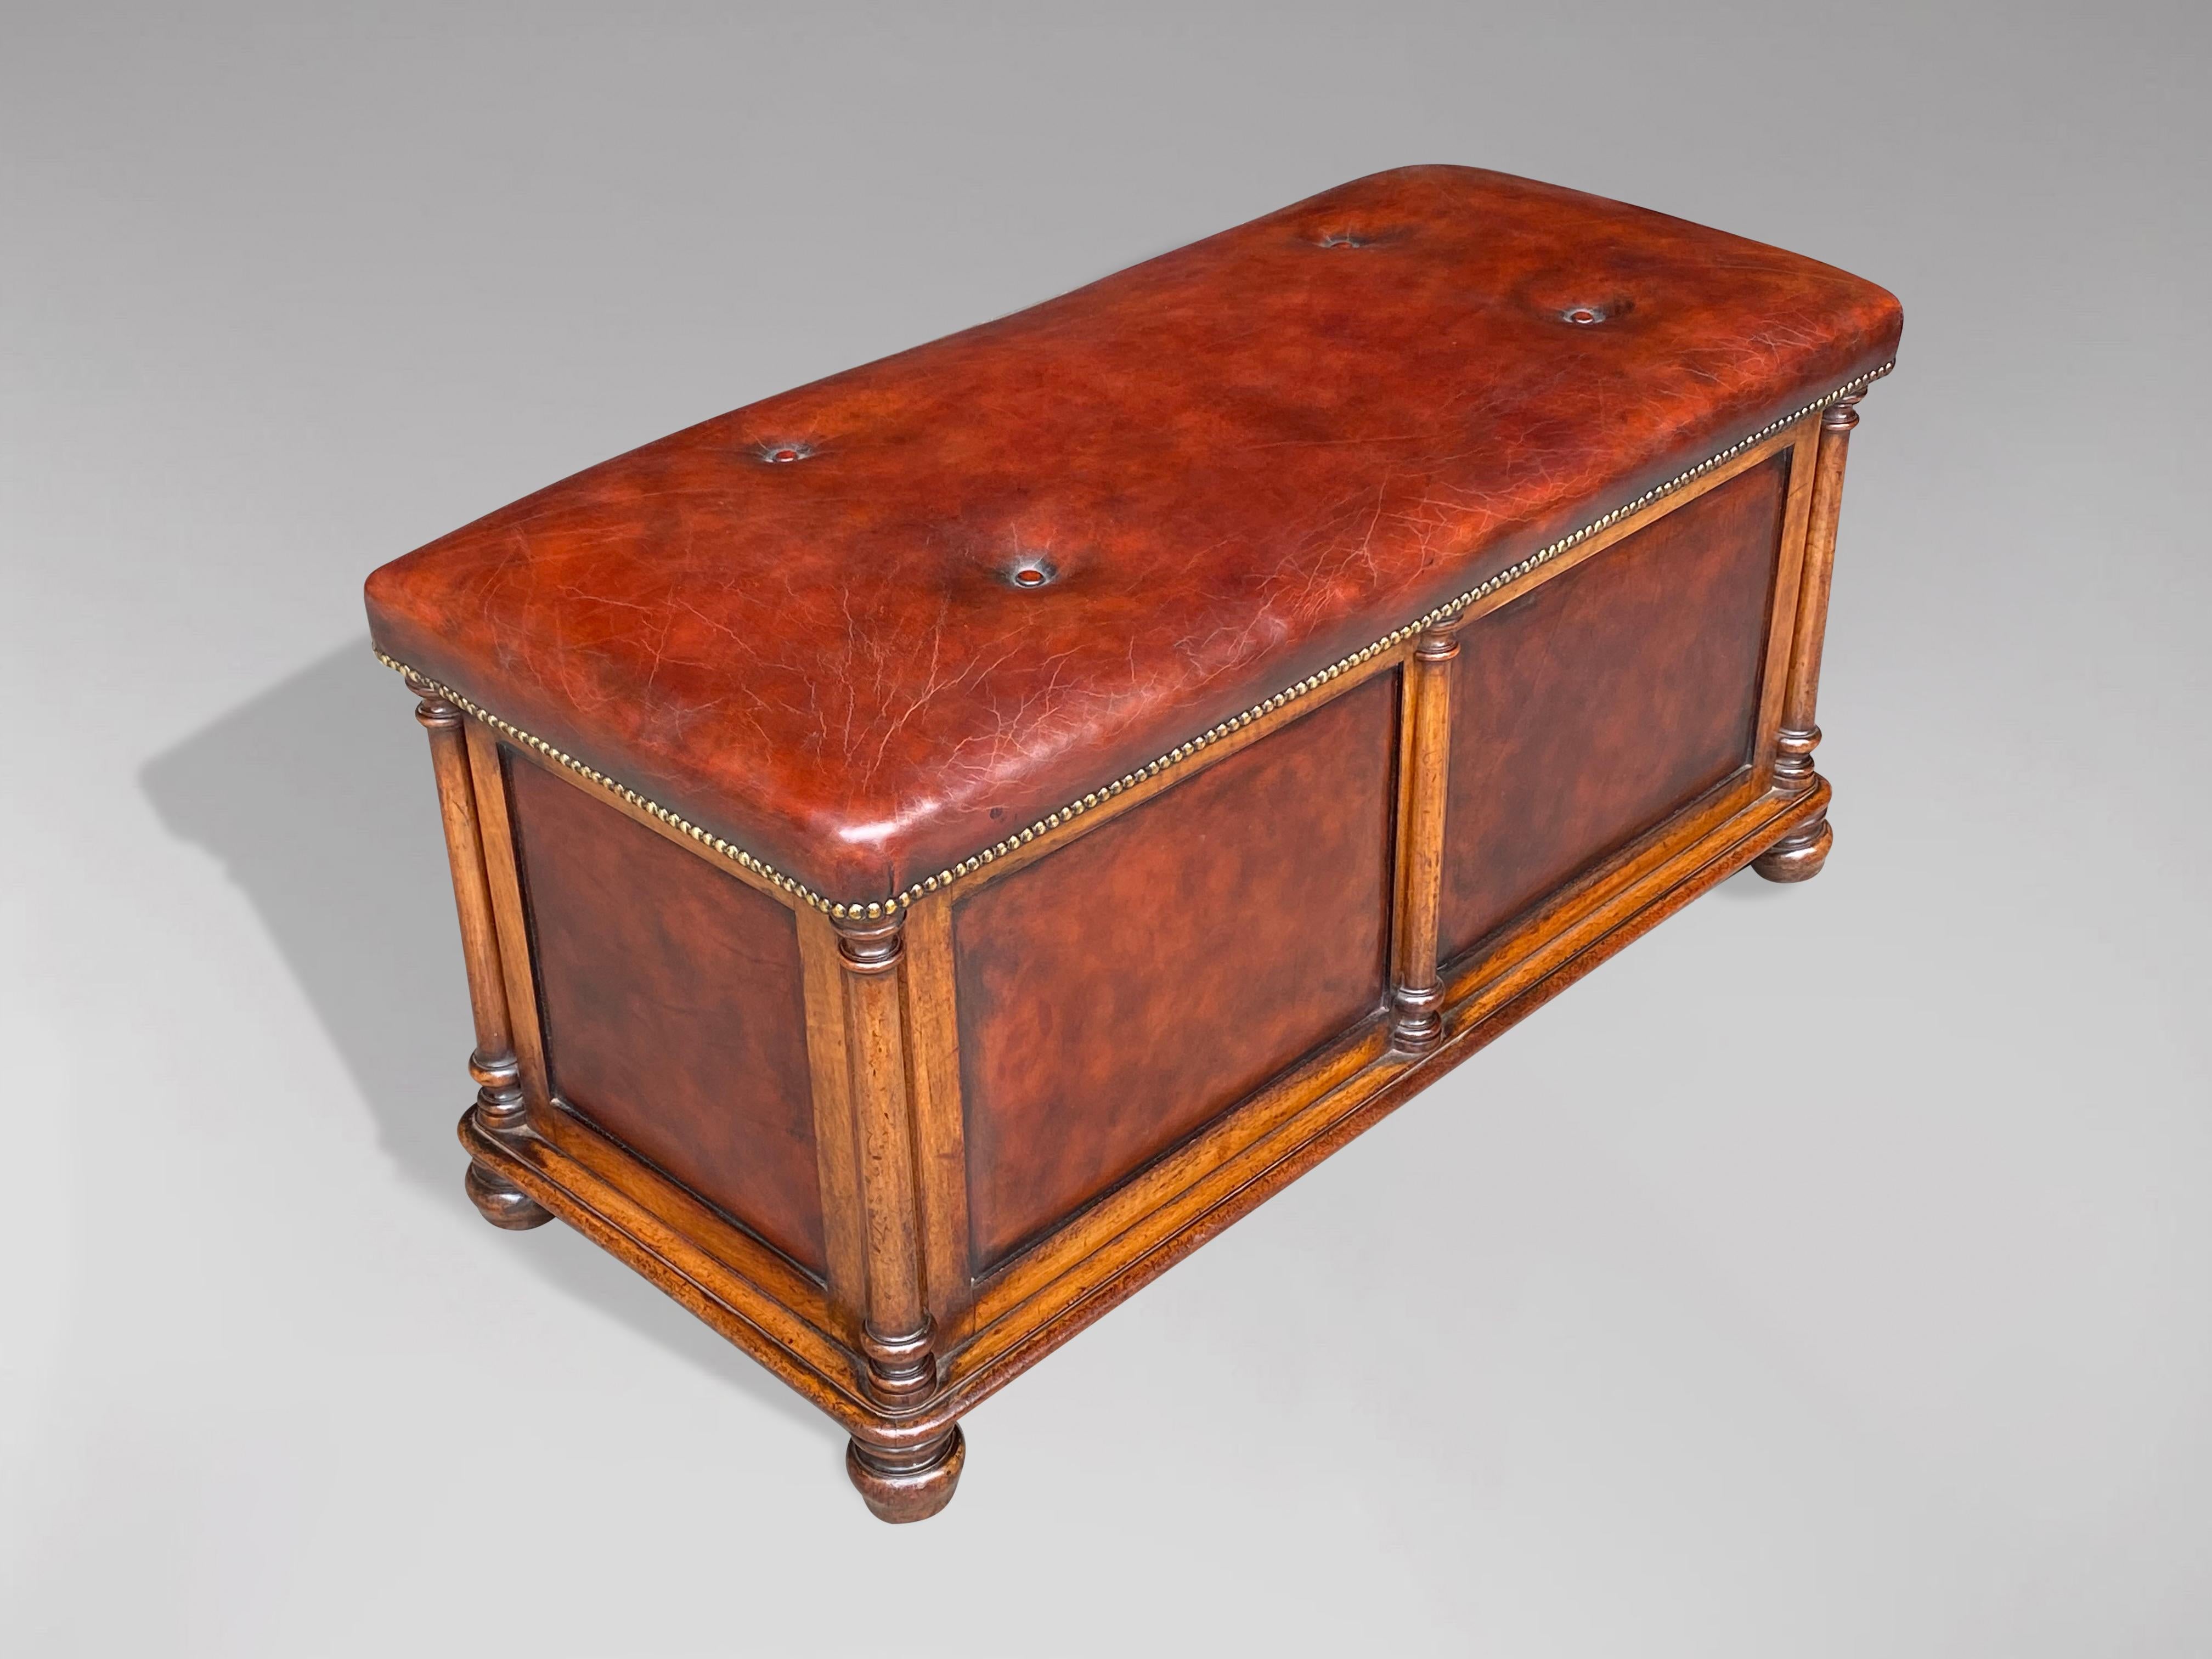 A fine quality early 19th century, William IV period walnut and leather ottoman. Deep red coloured buttoned leather seat above a well figured walnut and leather panelled base with turned walnut columns to each corner. Raised on four bun feet. The